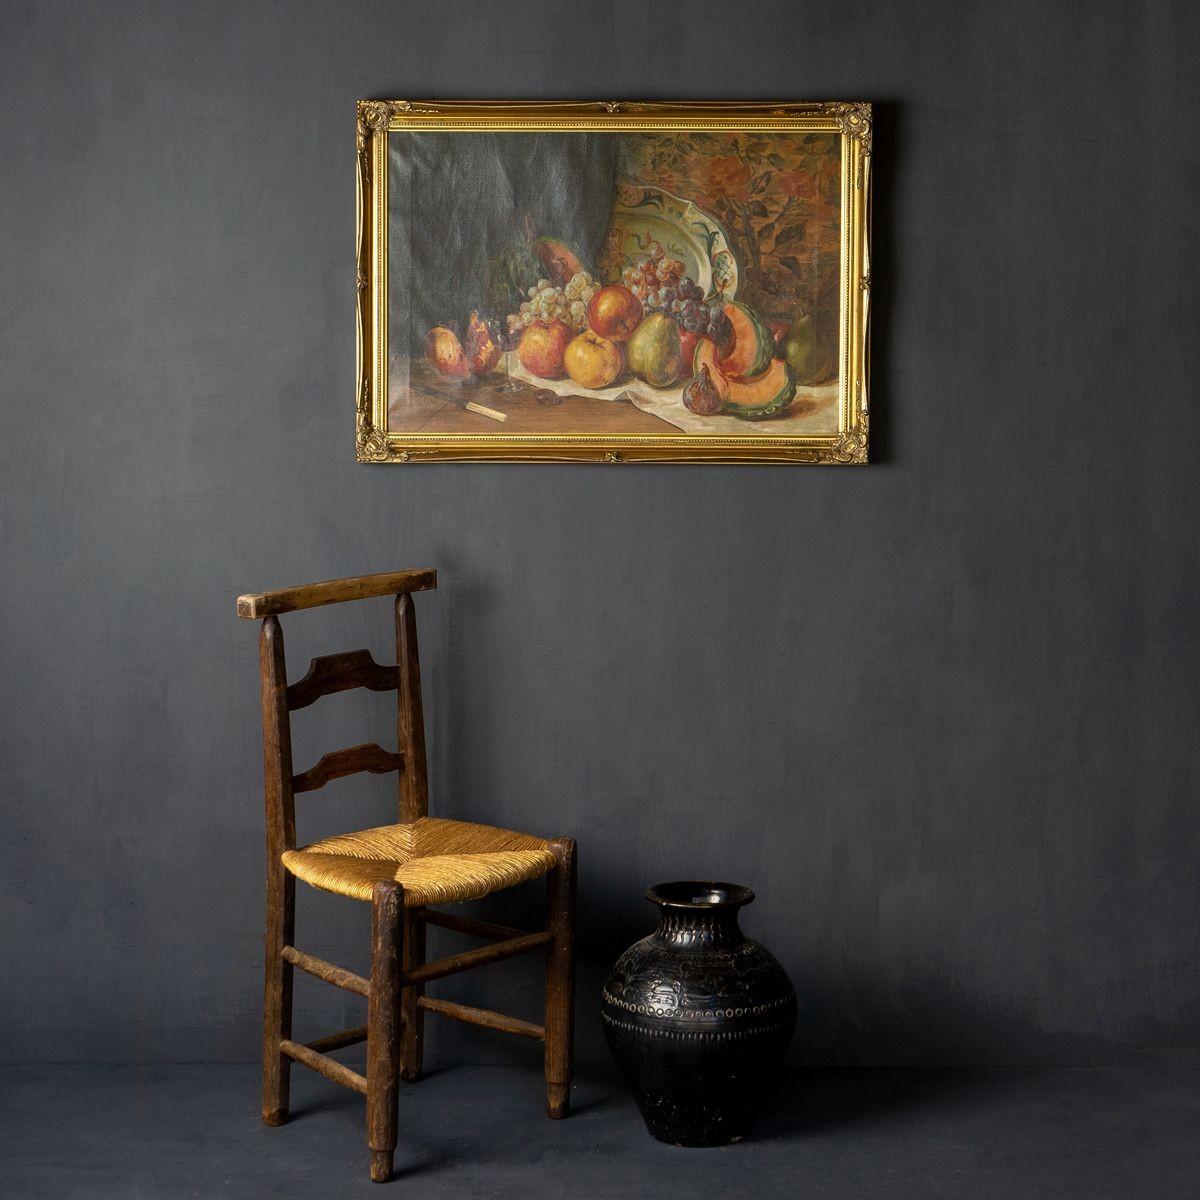 Hand-Painted Large Antique Still Life Depicting Fruit and Dinnerware, 19th Century Original